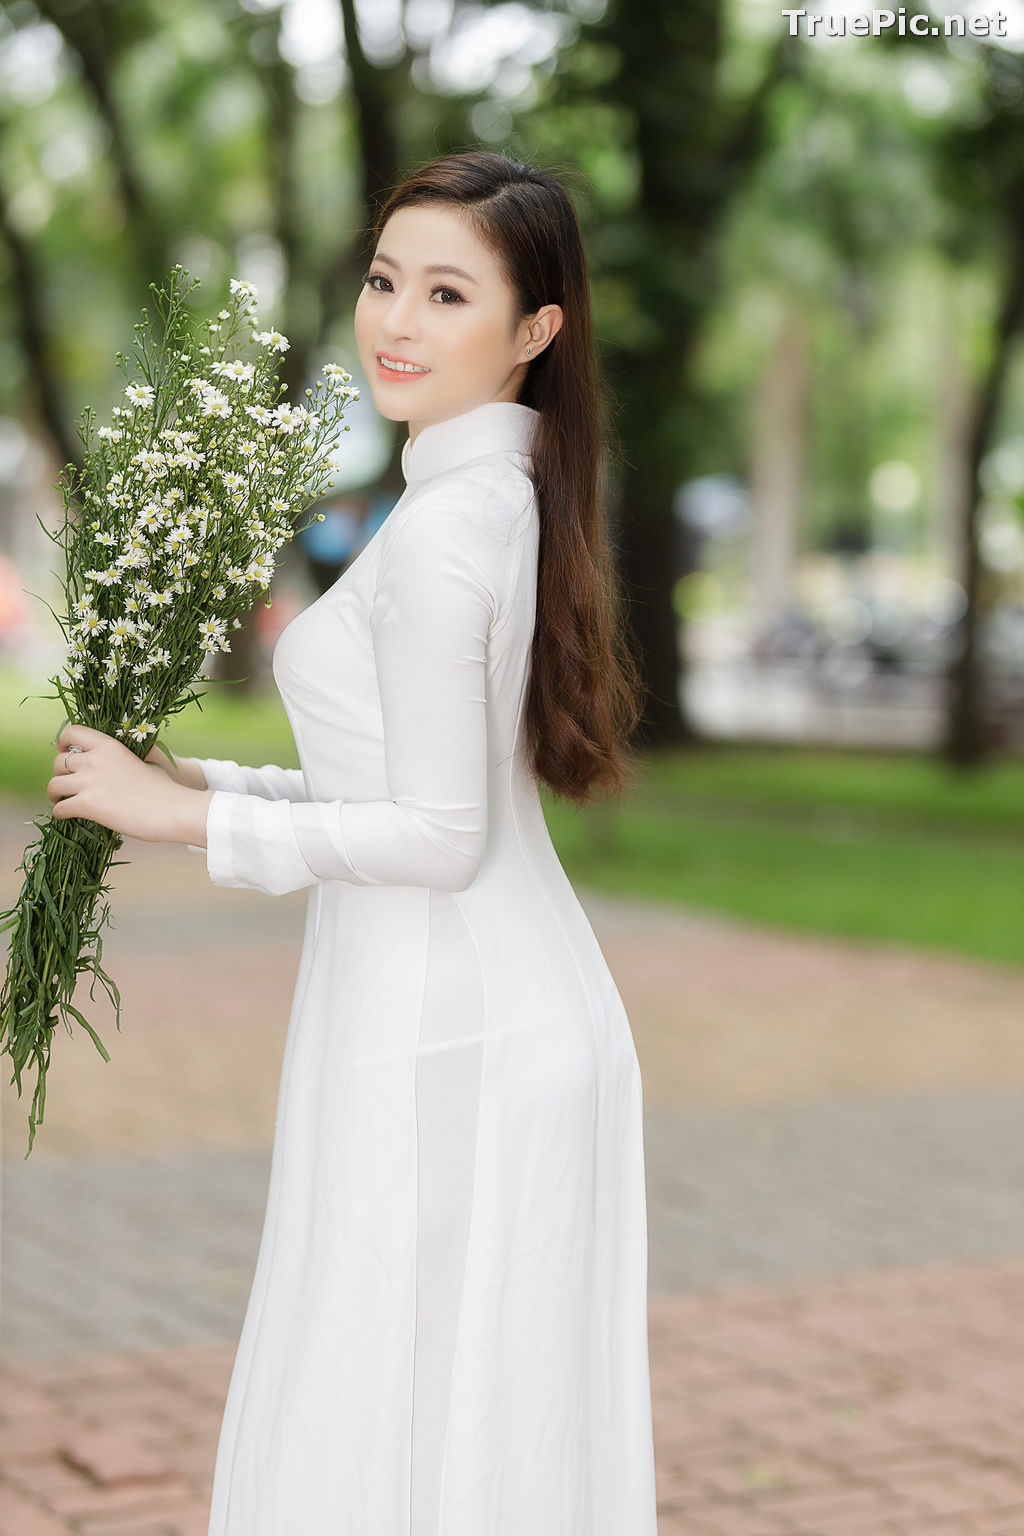 Image The Beauty of Vietnamese Girls with Traditional Dress (Ao Dai) #1 - TruePic.net - Picture-55